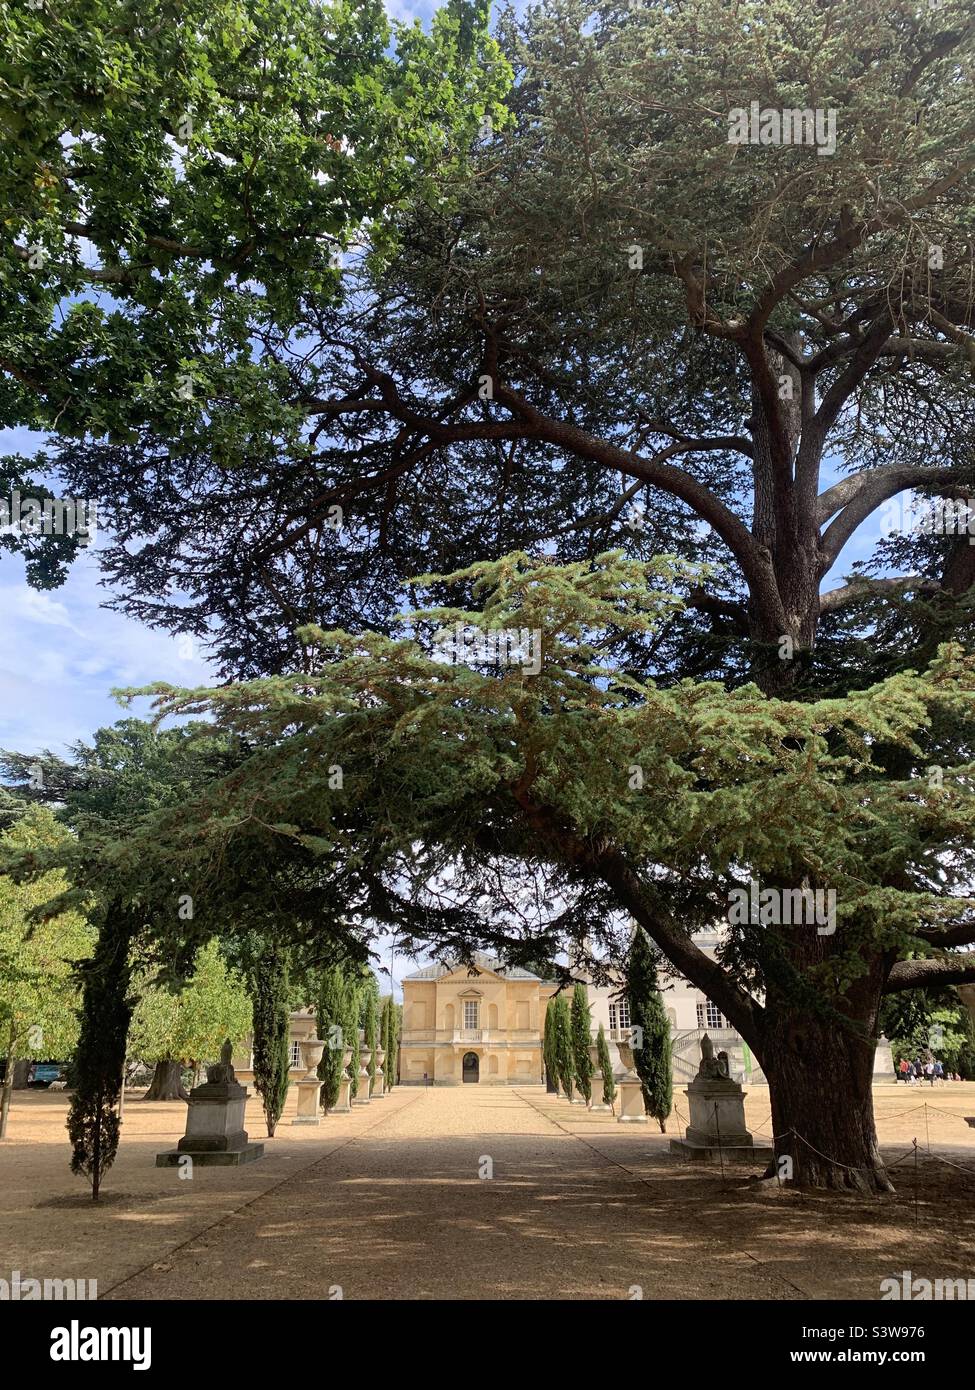 Chiswick house gardens with tree in foreground Stock Photo